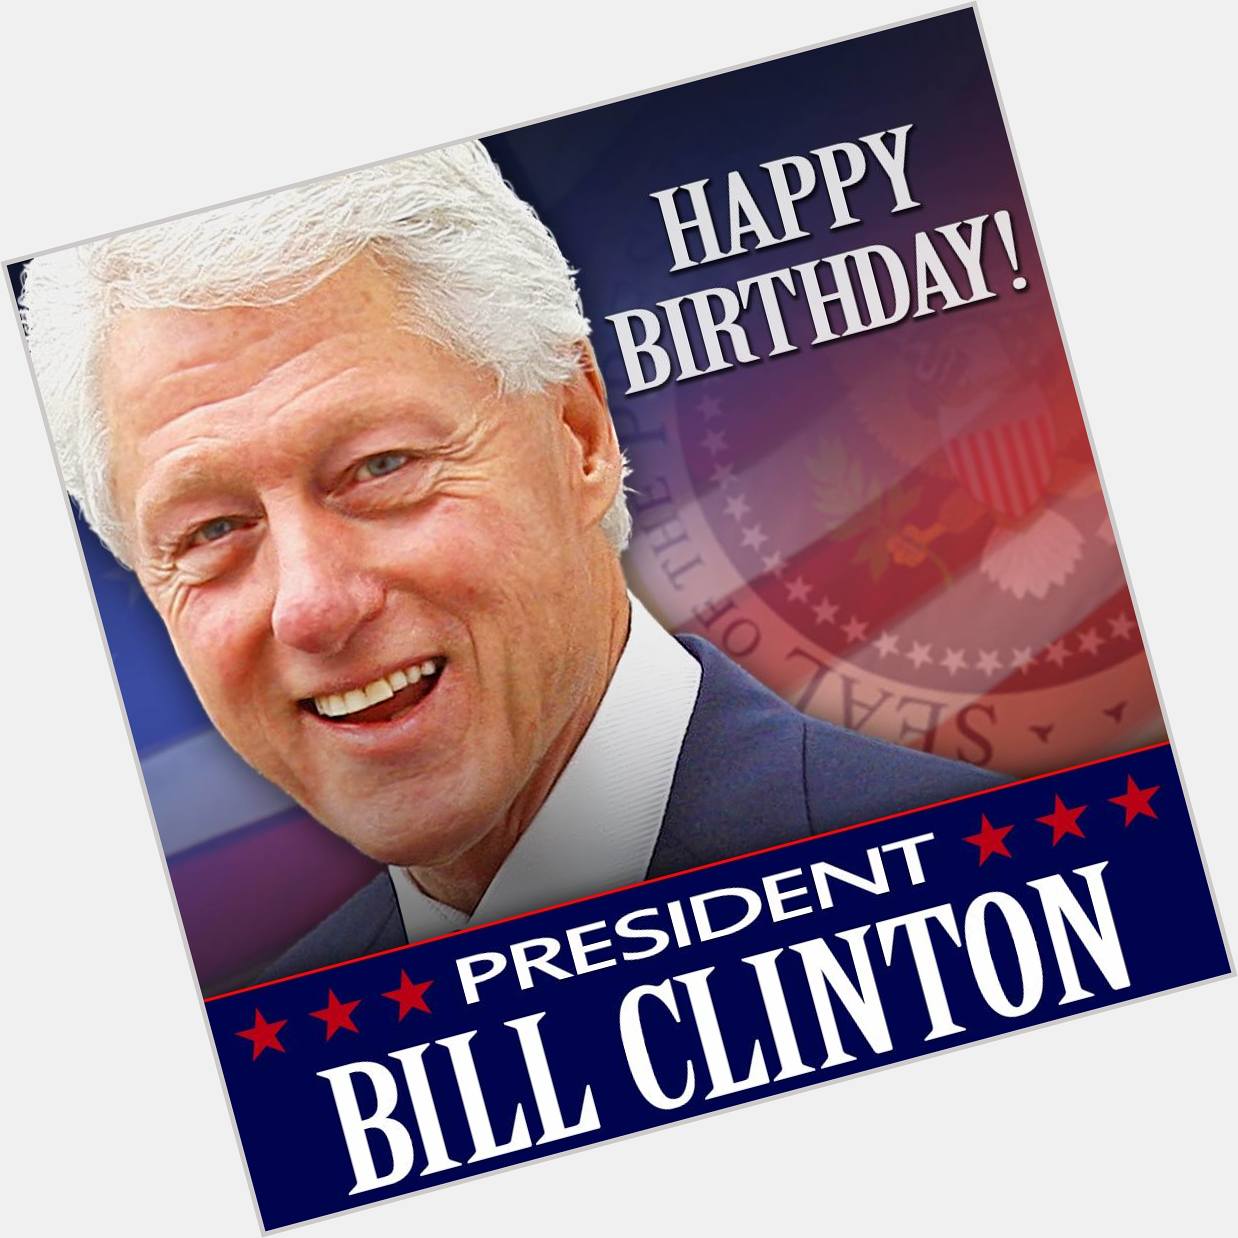 HAPPY BIRTHDAY BILL CLINTON! The 42nd President of the United States is turning 72-years-old today! 